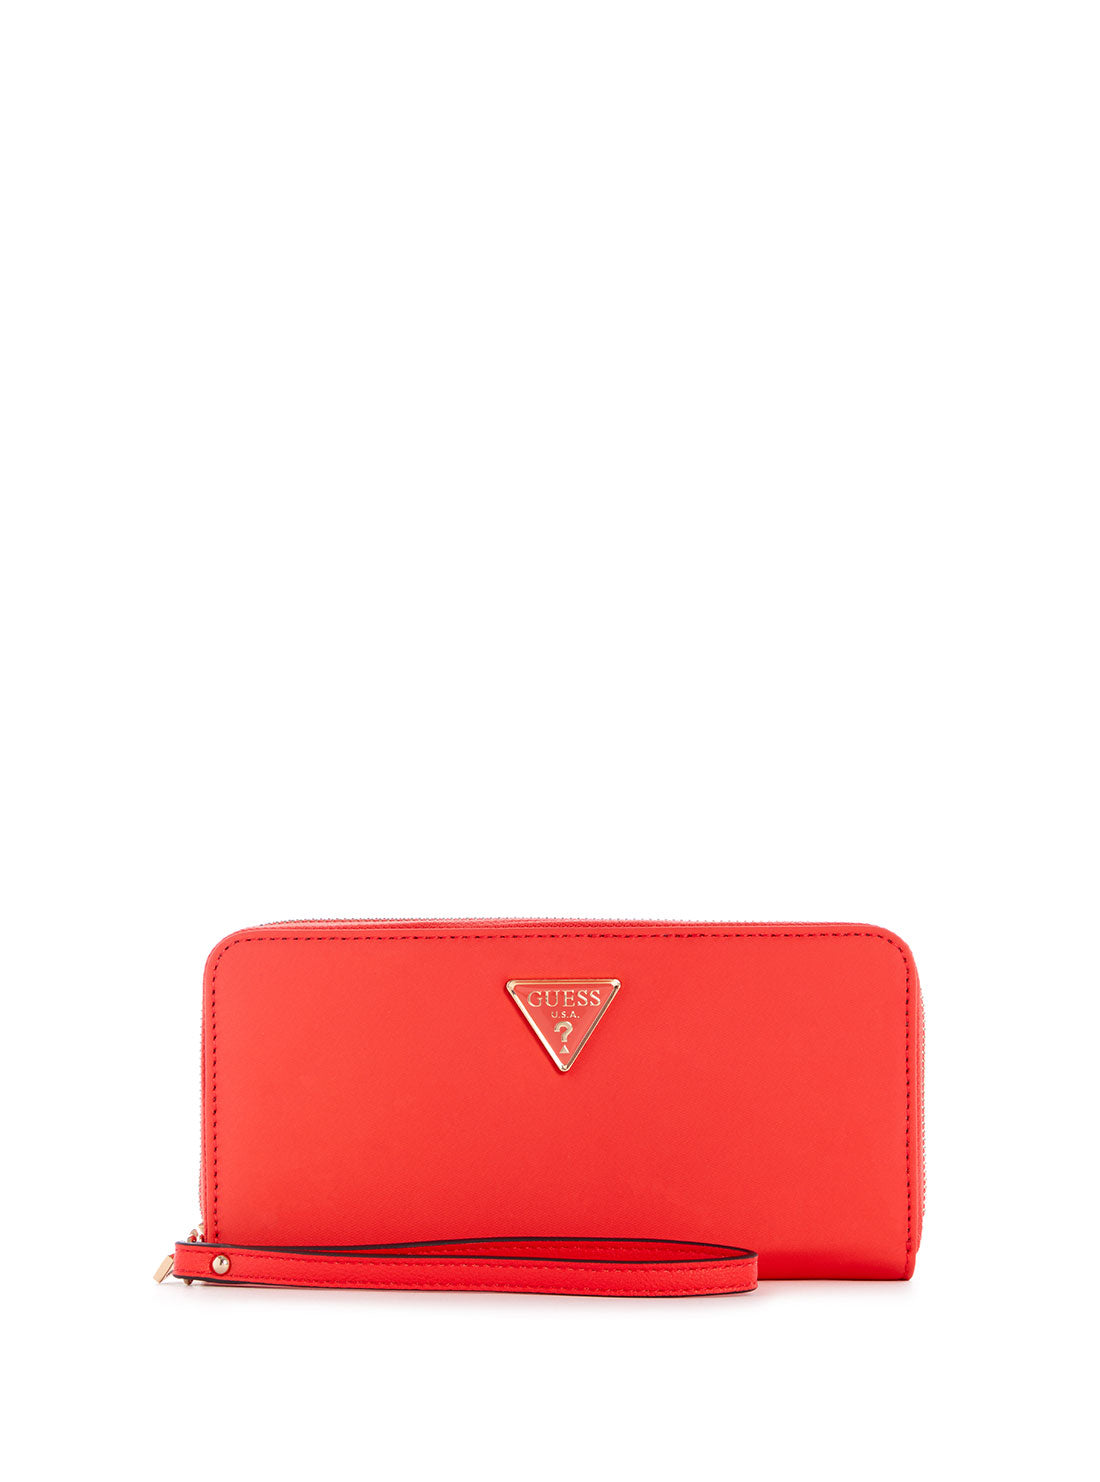 Eco Red Gemma Large Wallet - GUESS